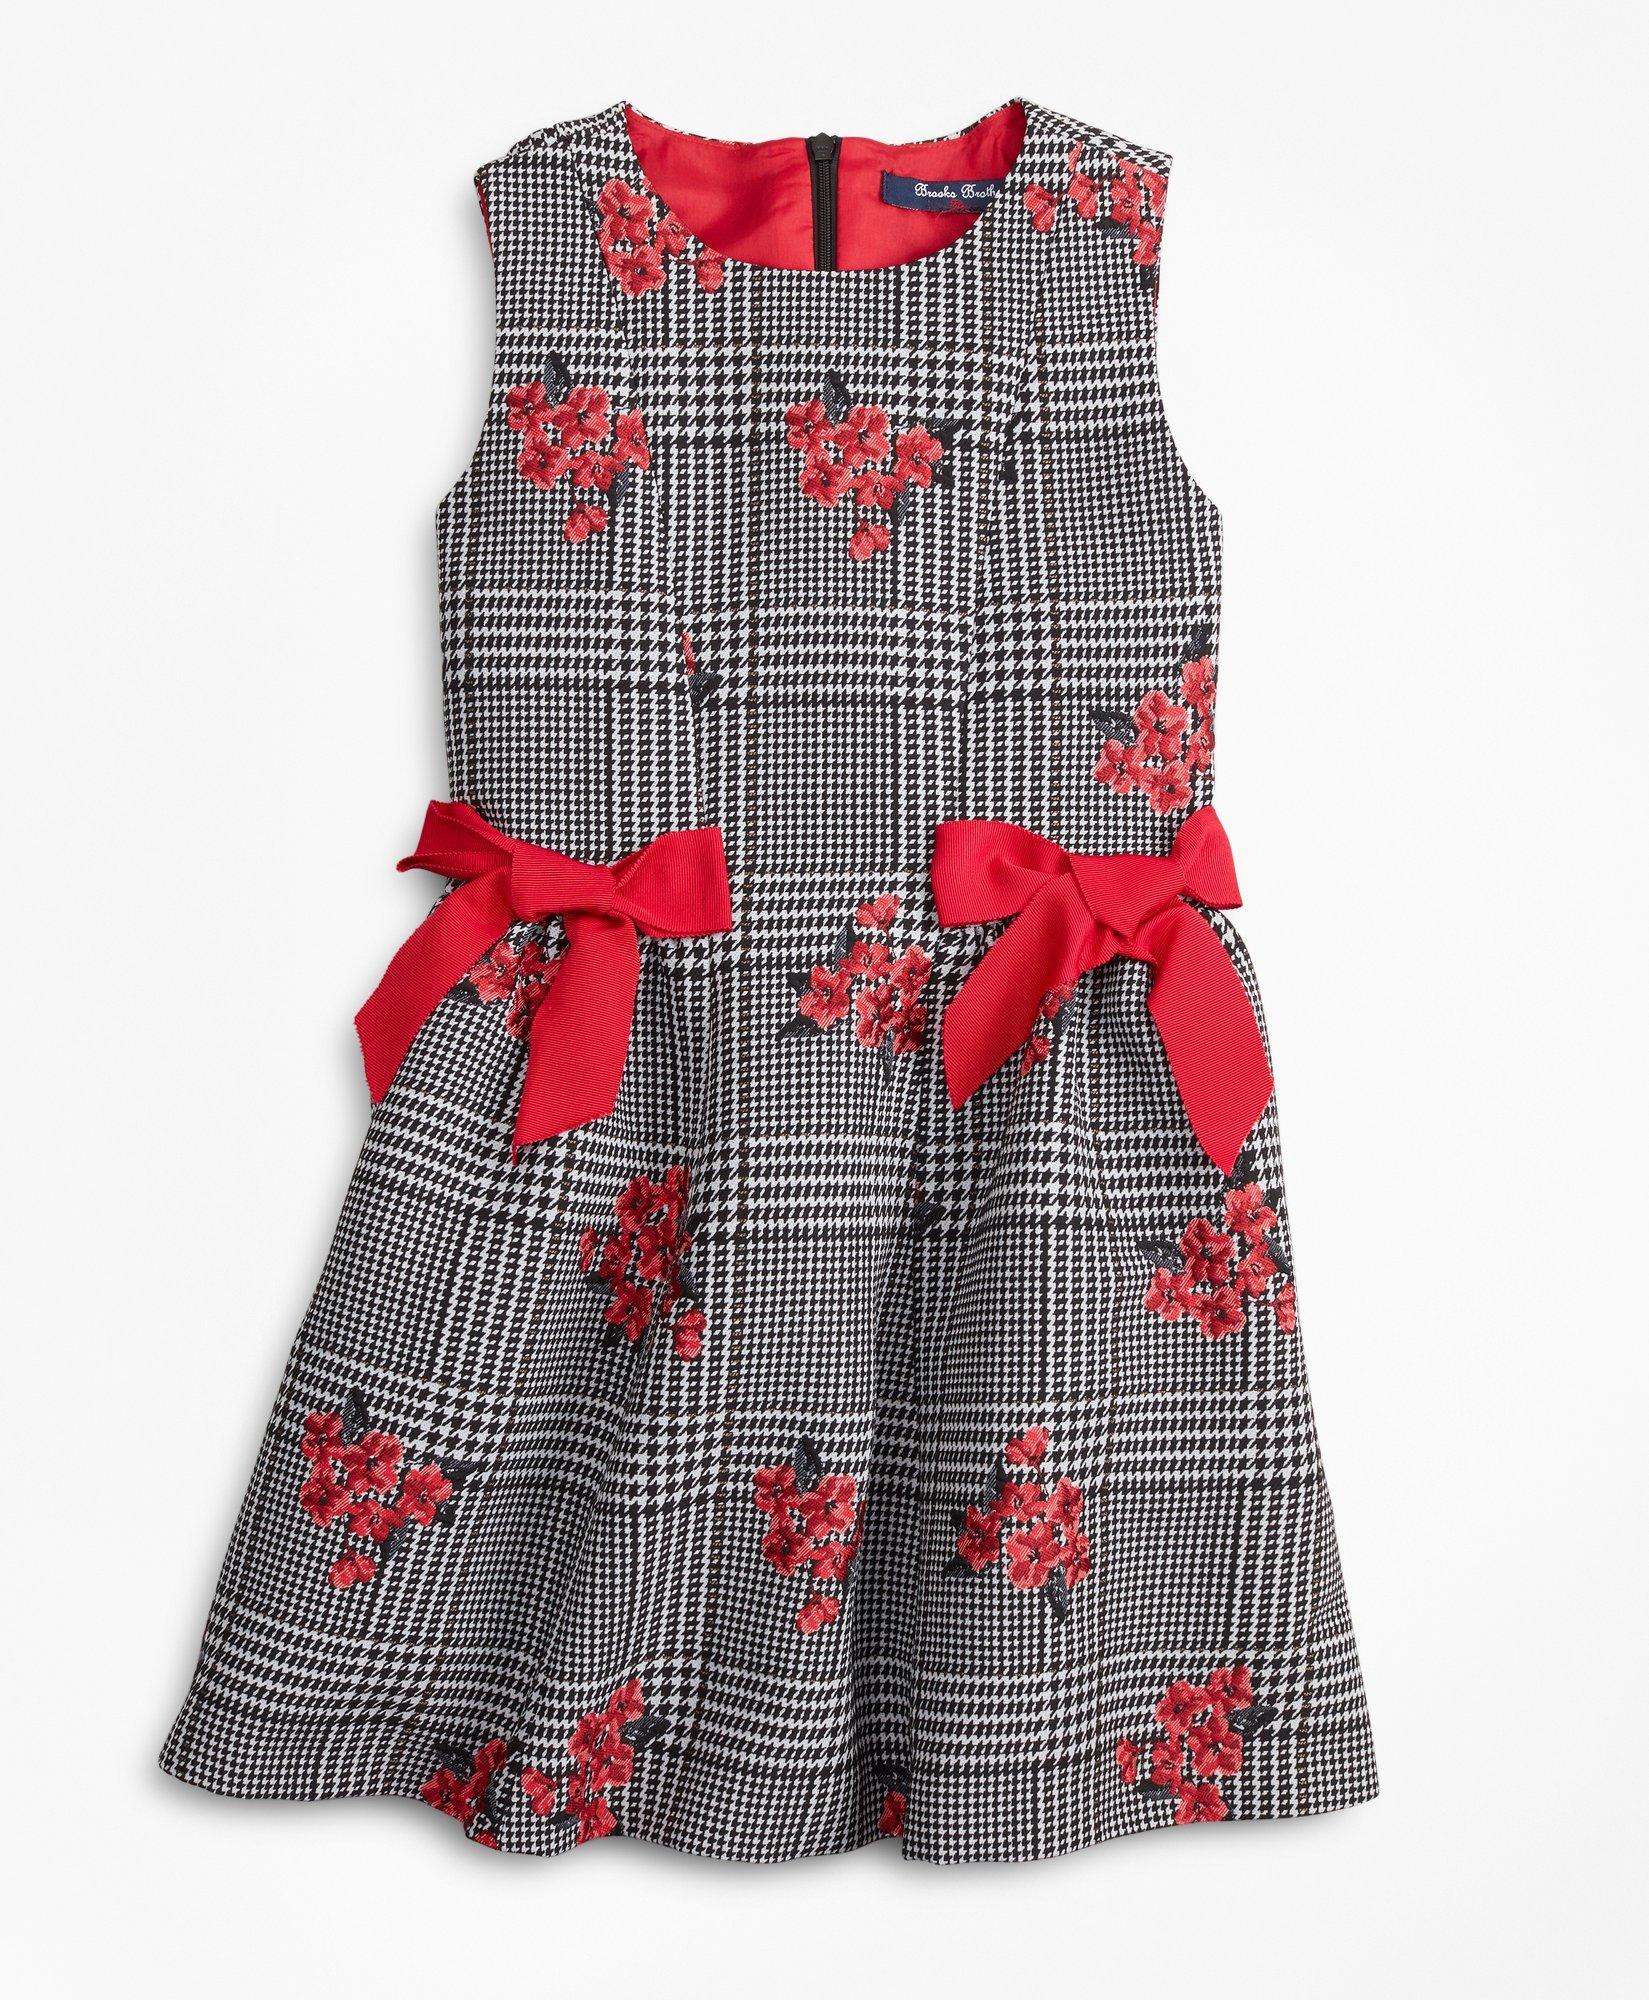 Girls Floral Jacquard and Houndstooth Dress